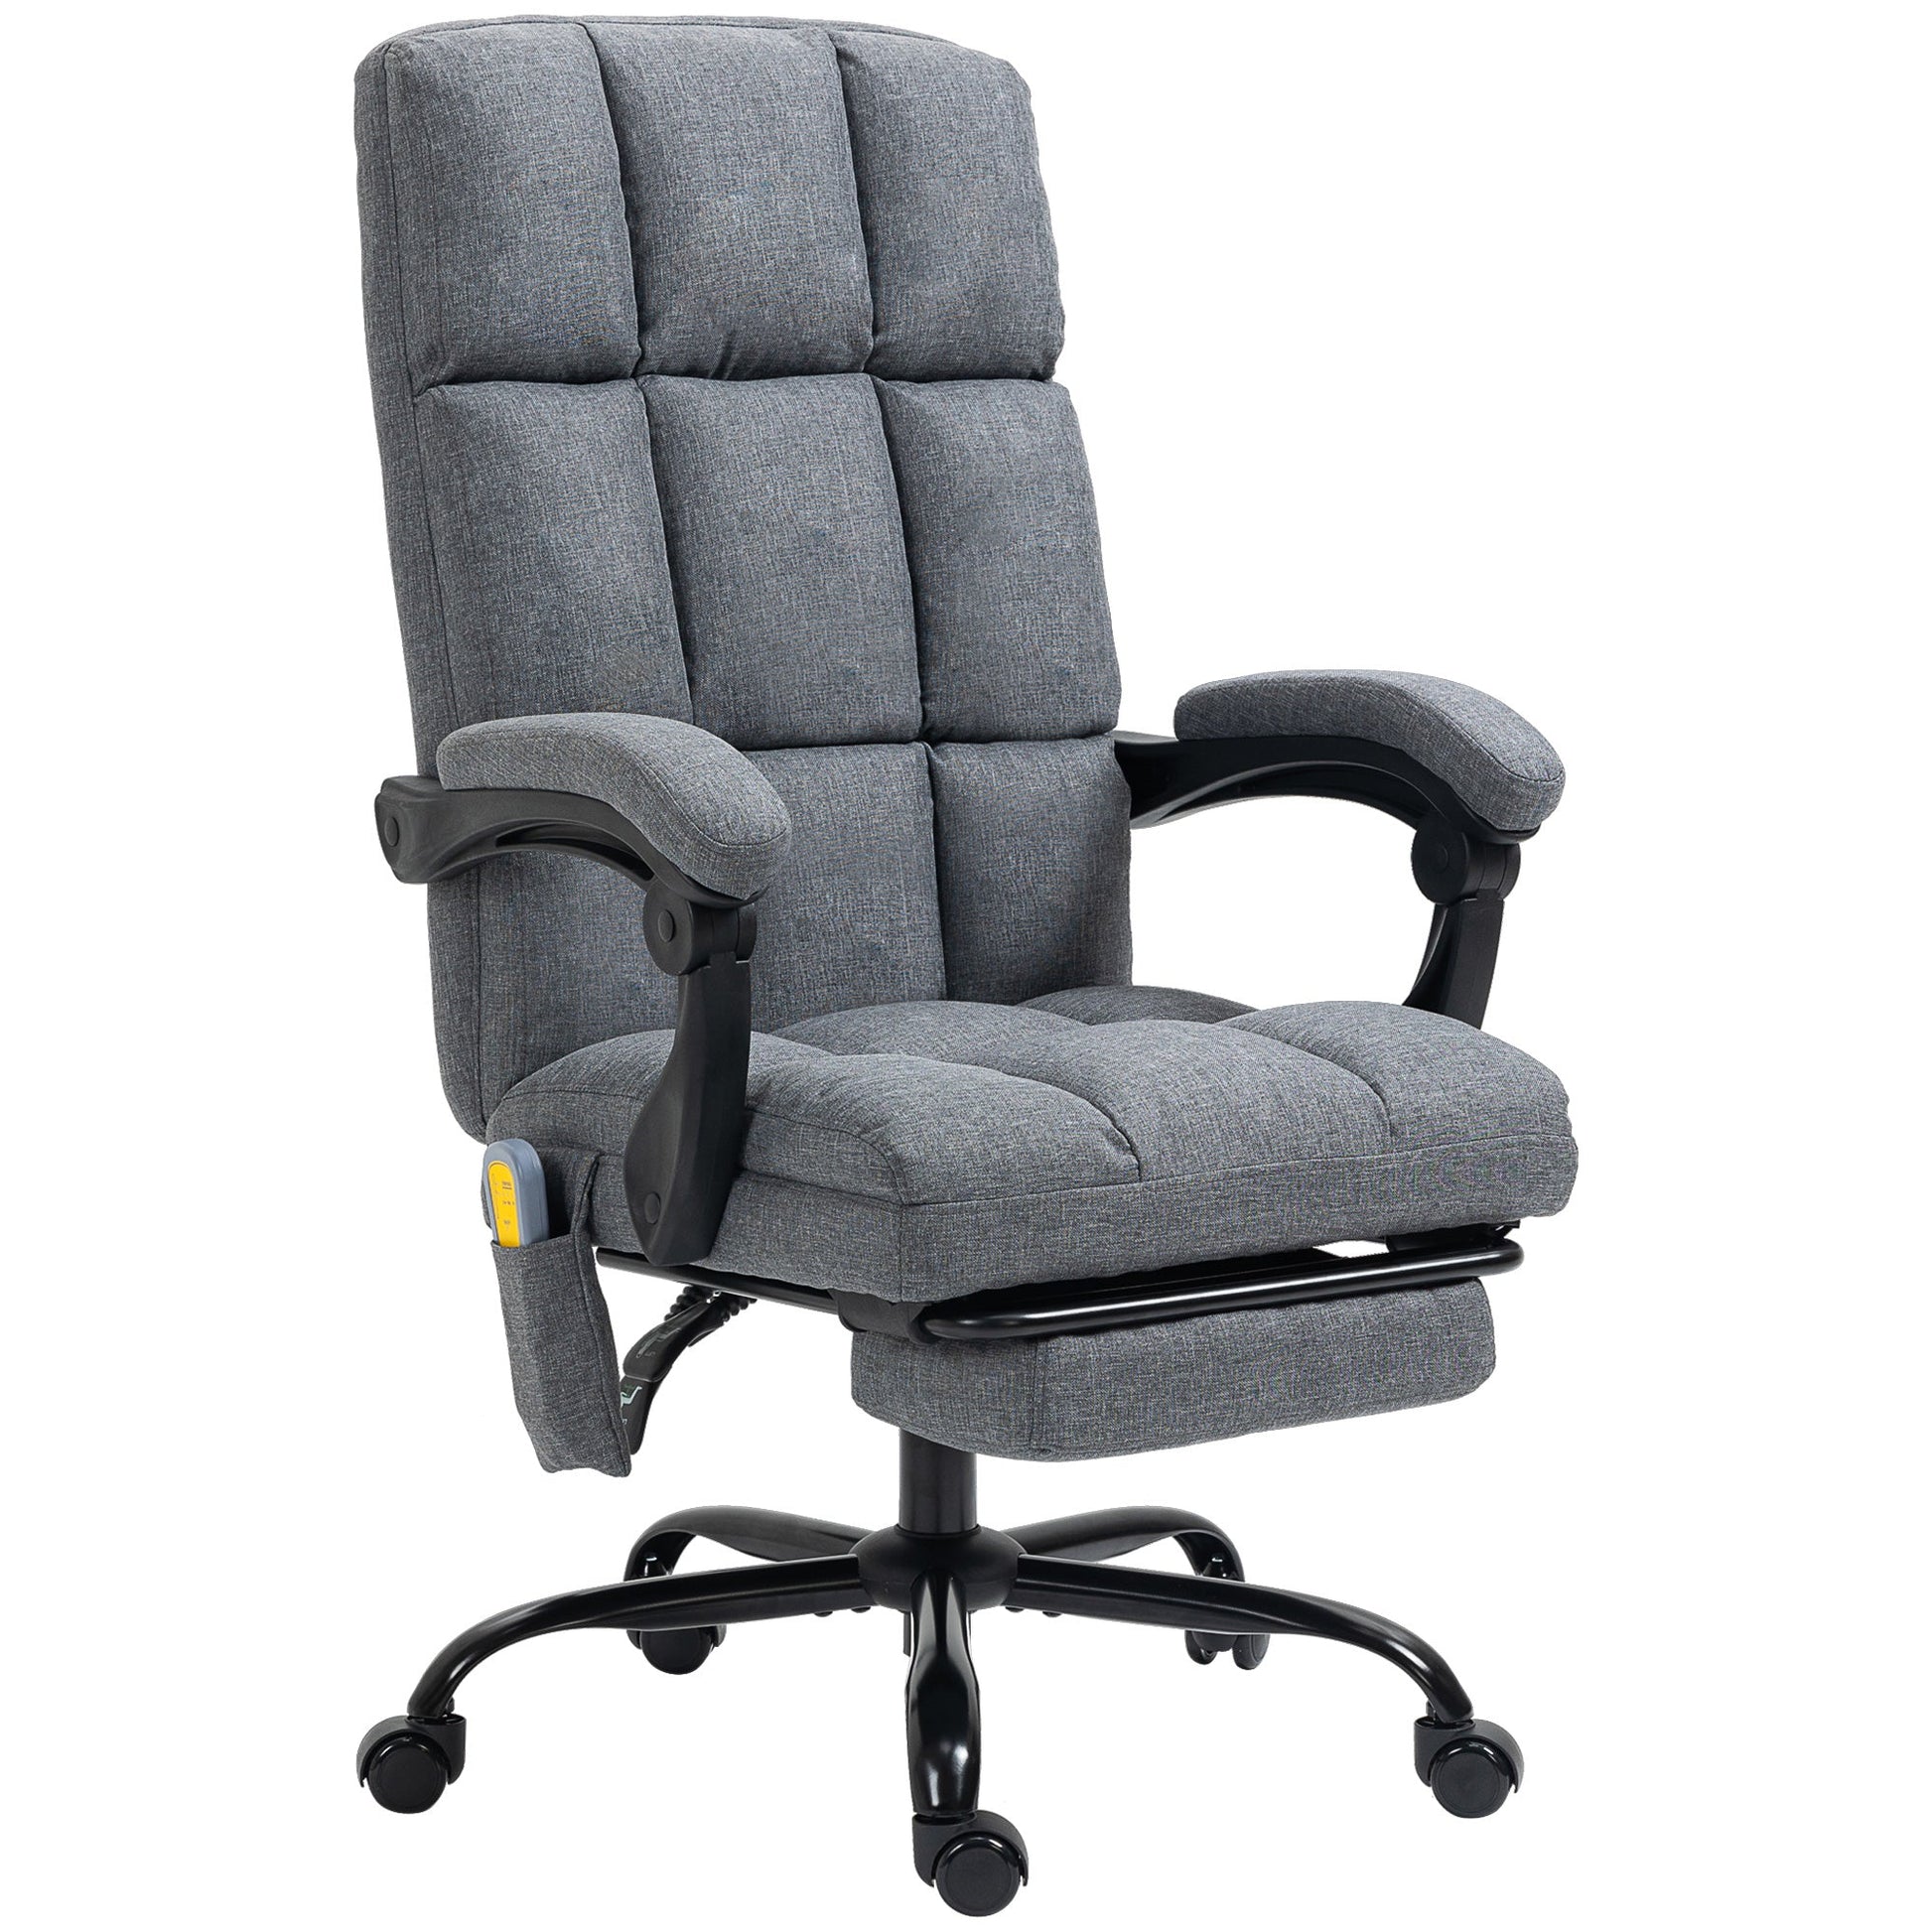 High-Back Vibration Massaging Office Chair, Reclining Office Chair with USB Port, Remote Control, Side Pocket and Footrest, Dark Grey at Gallery Canada